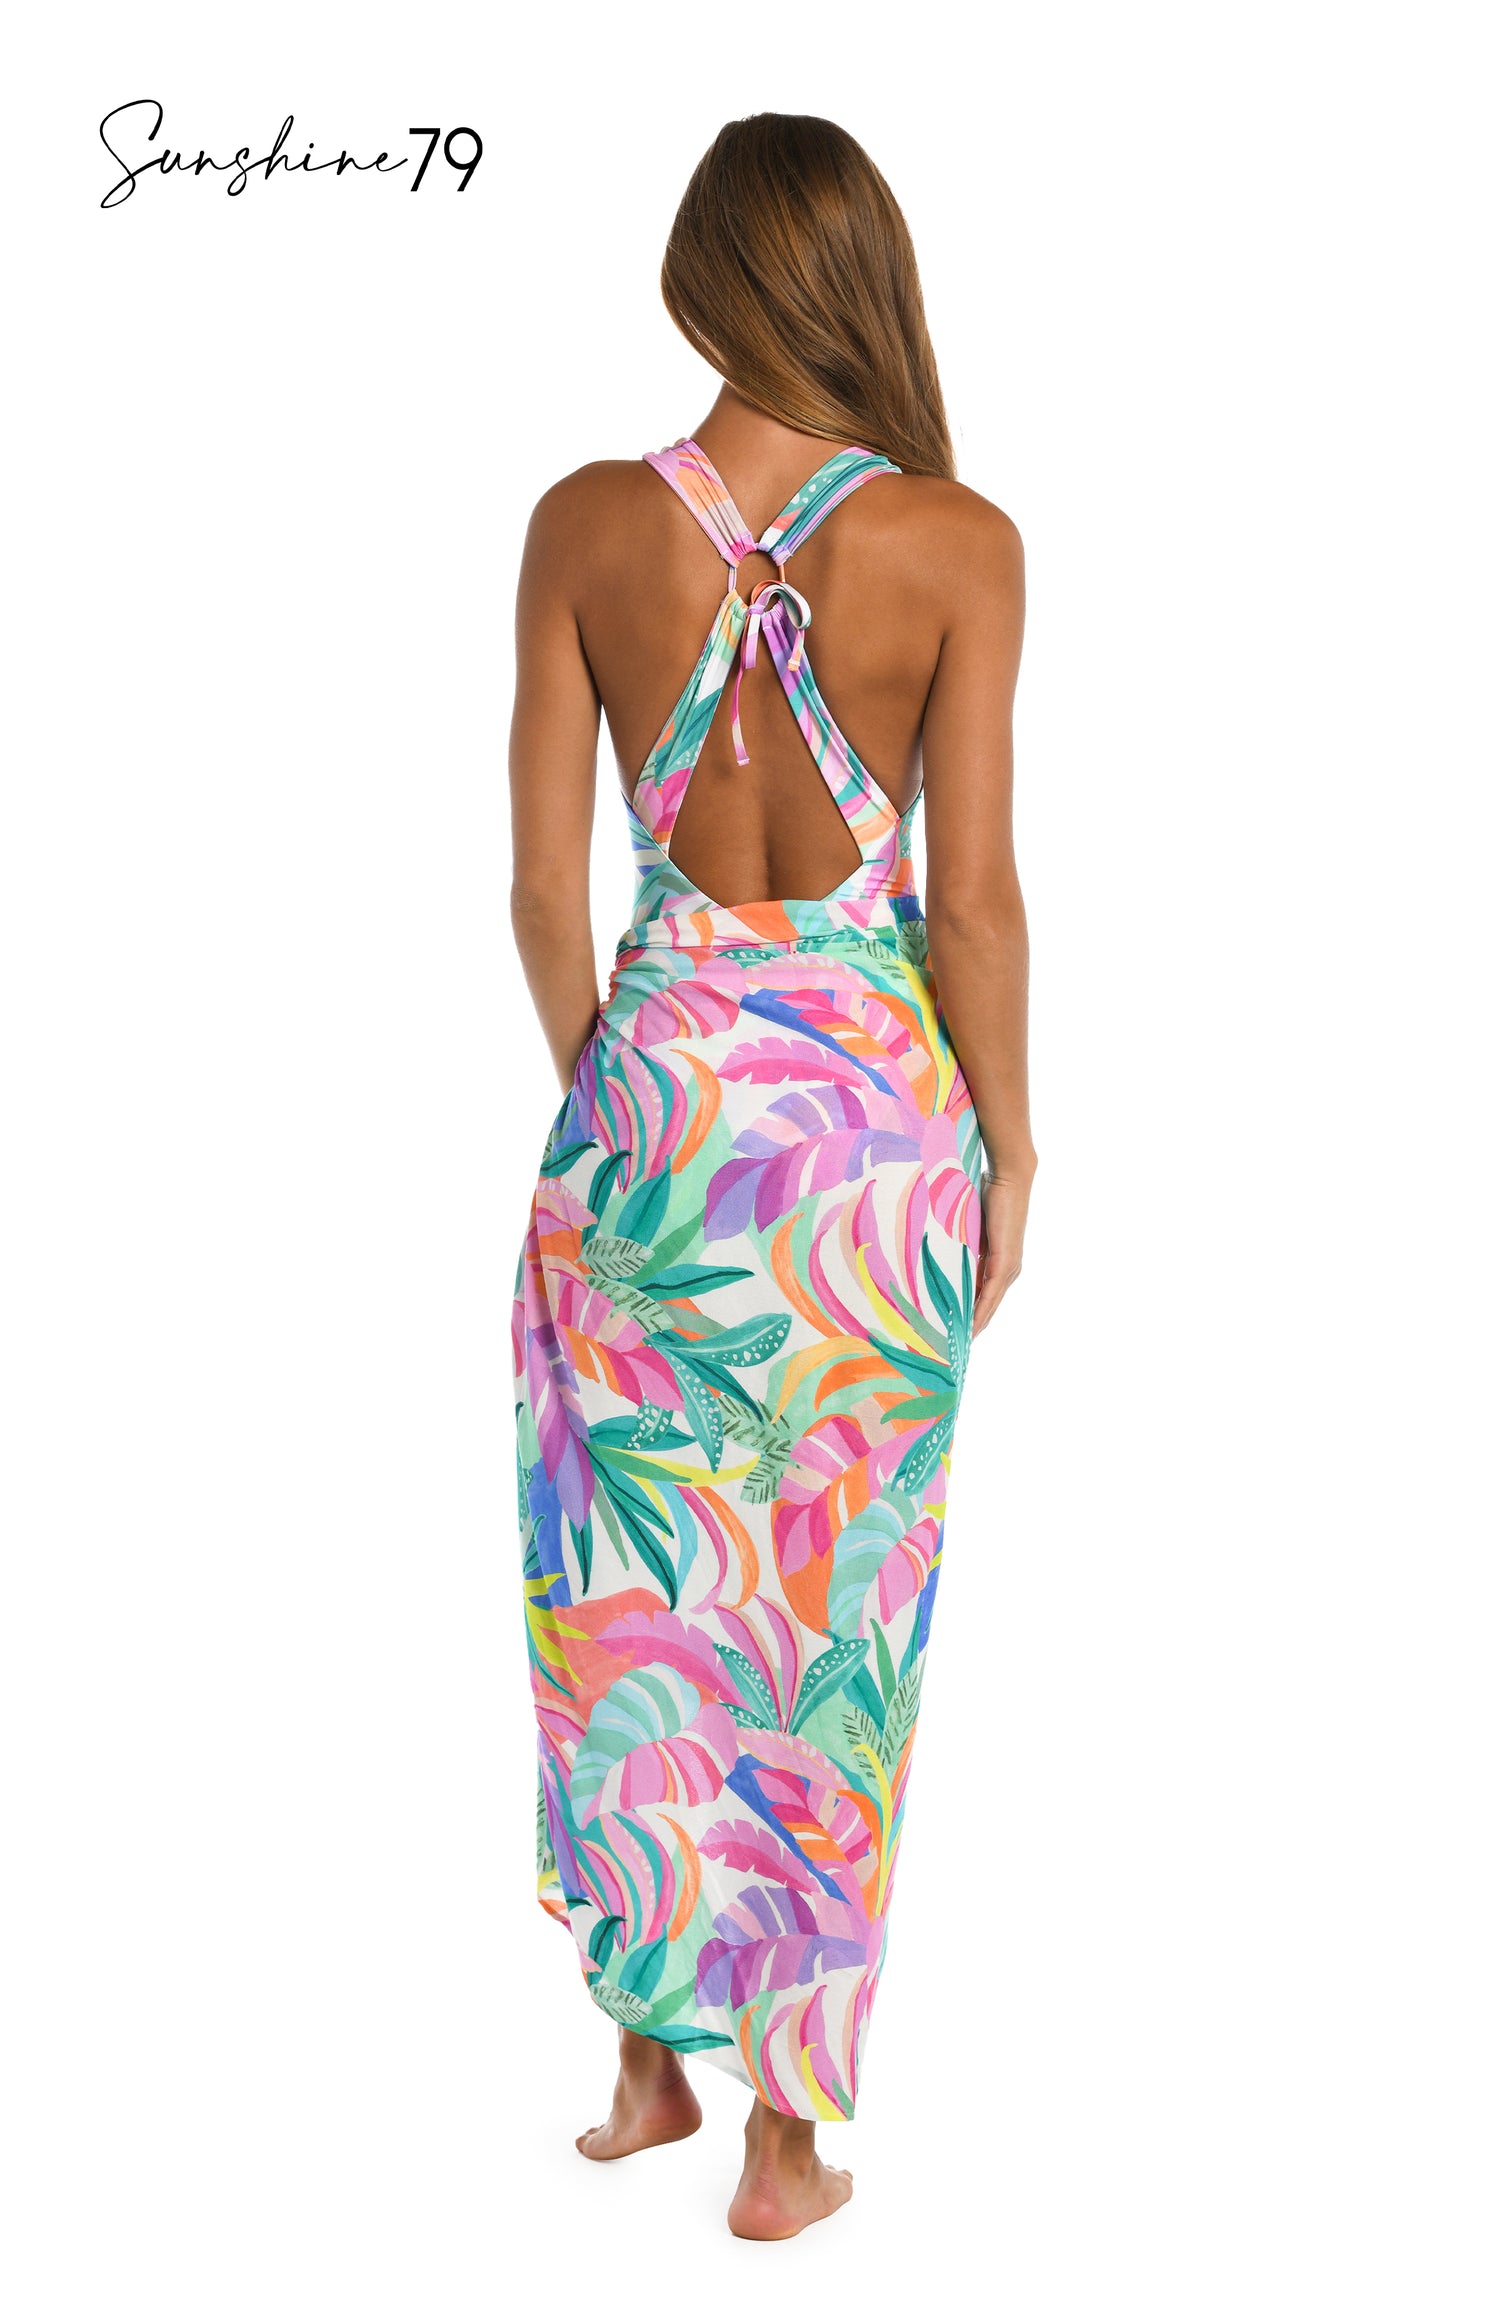 Model is wearing a multi colored tropical printed pareo cover up wrap from our Sunshine 79 brand.